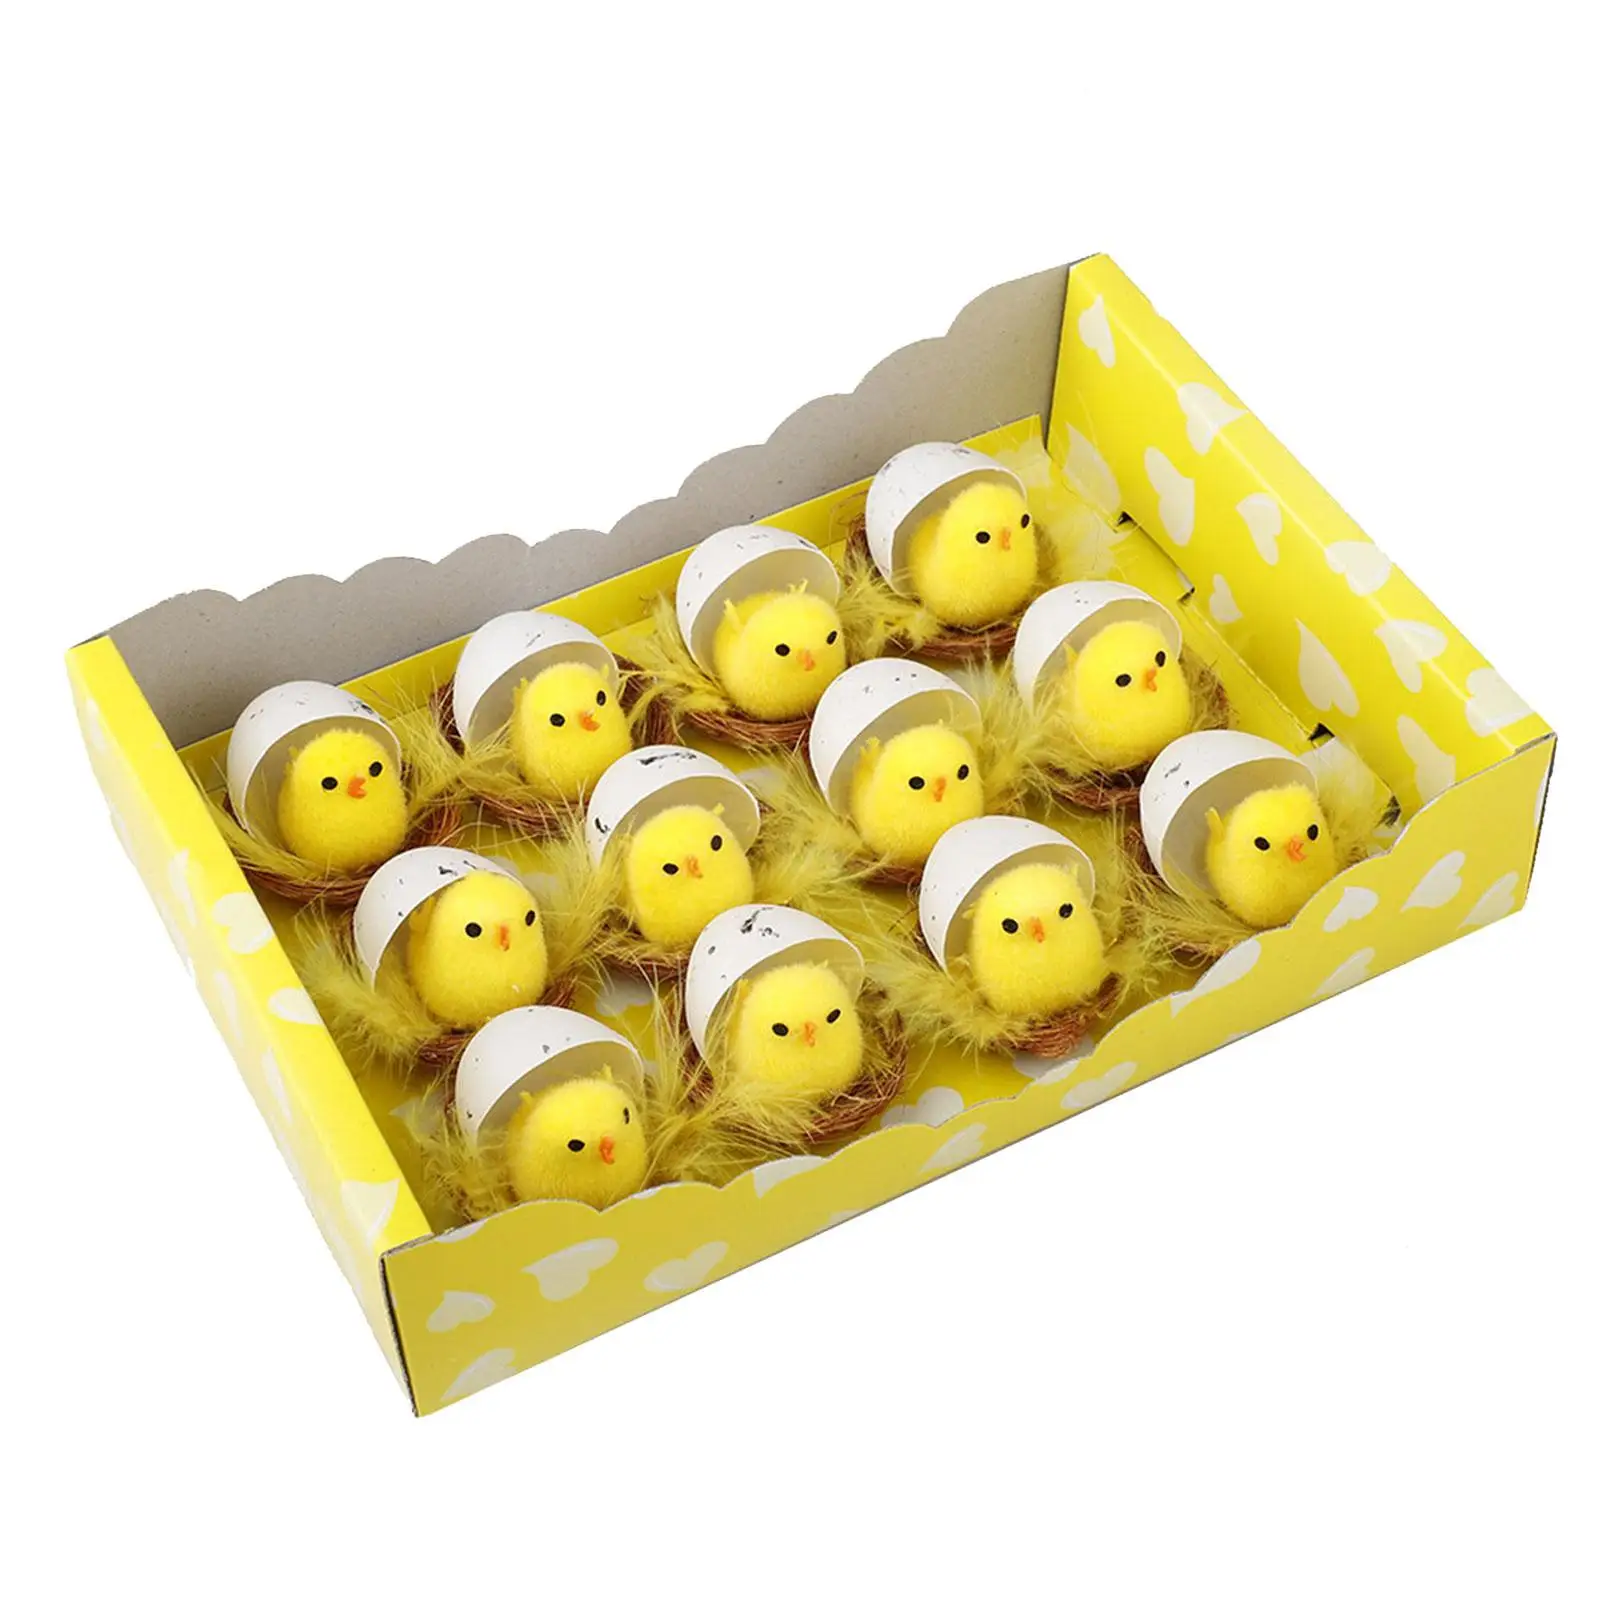 12 Pieces Mini Easter Decorative Chicks Ornaments Cute Basket Fillers Easter egg Decoration for Wedding Wall Windows Holiday